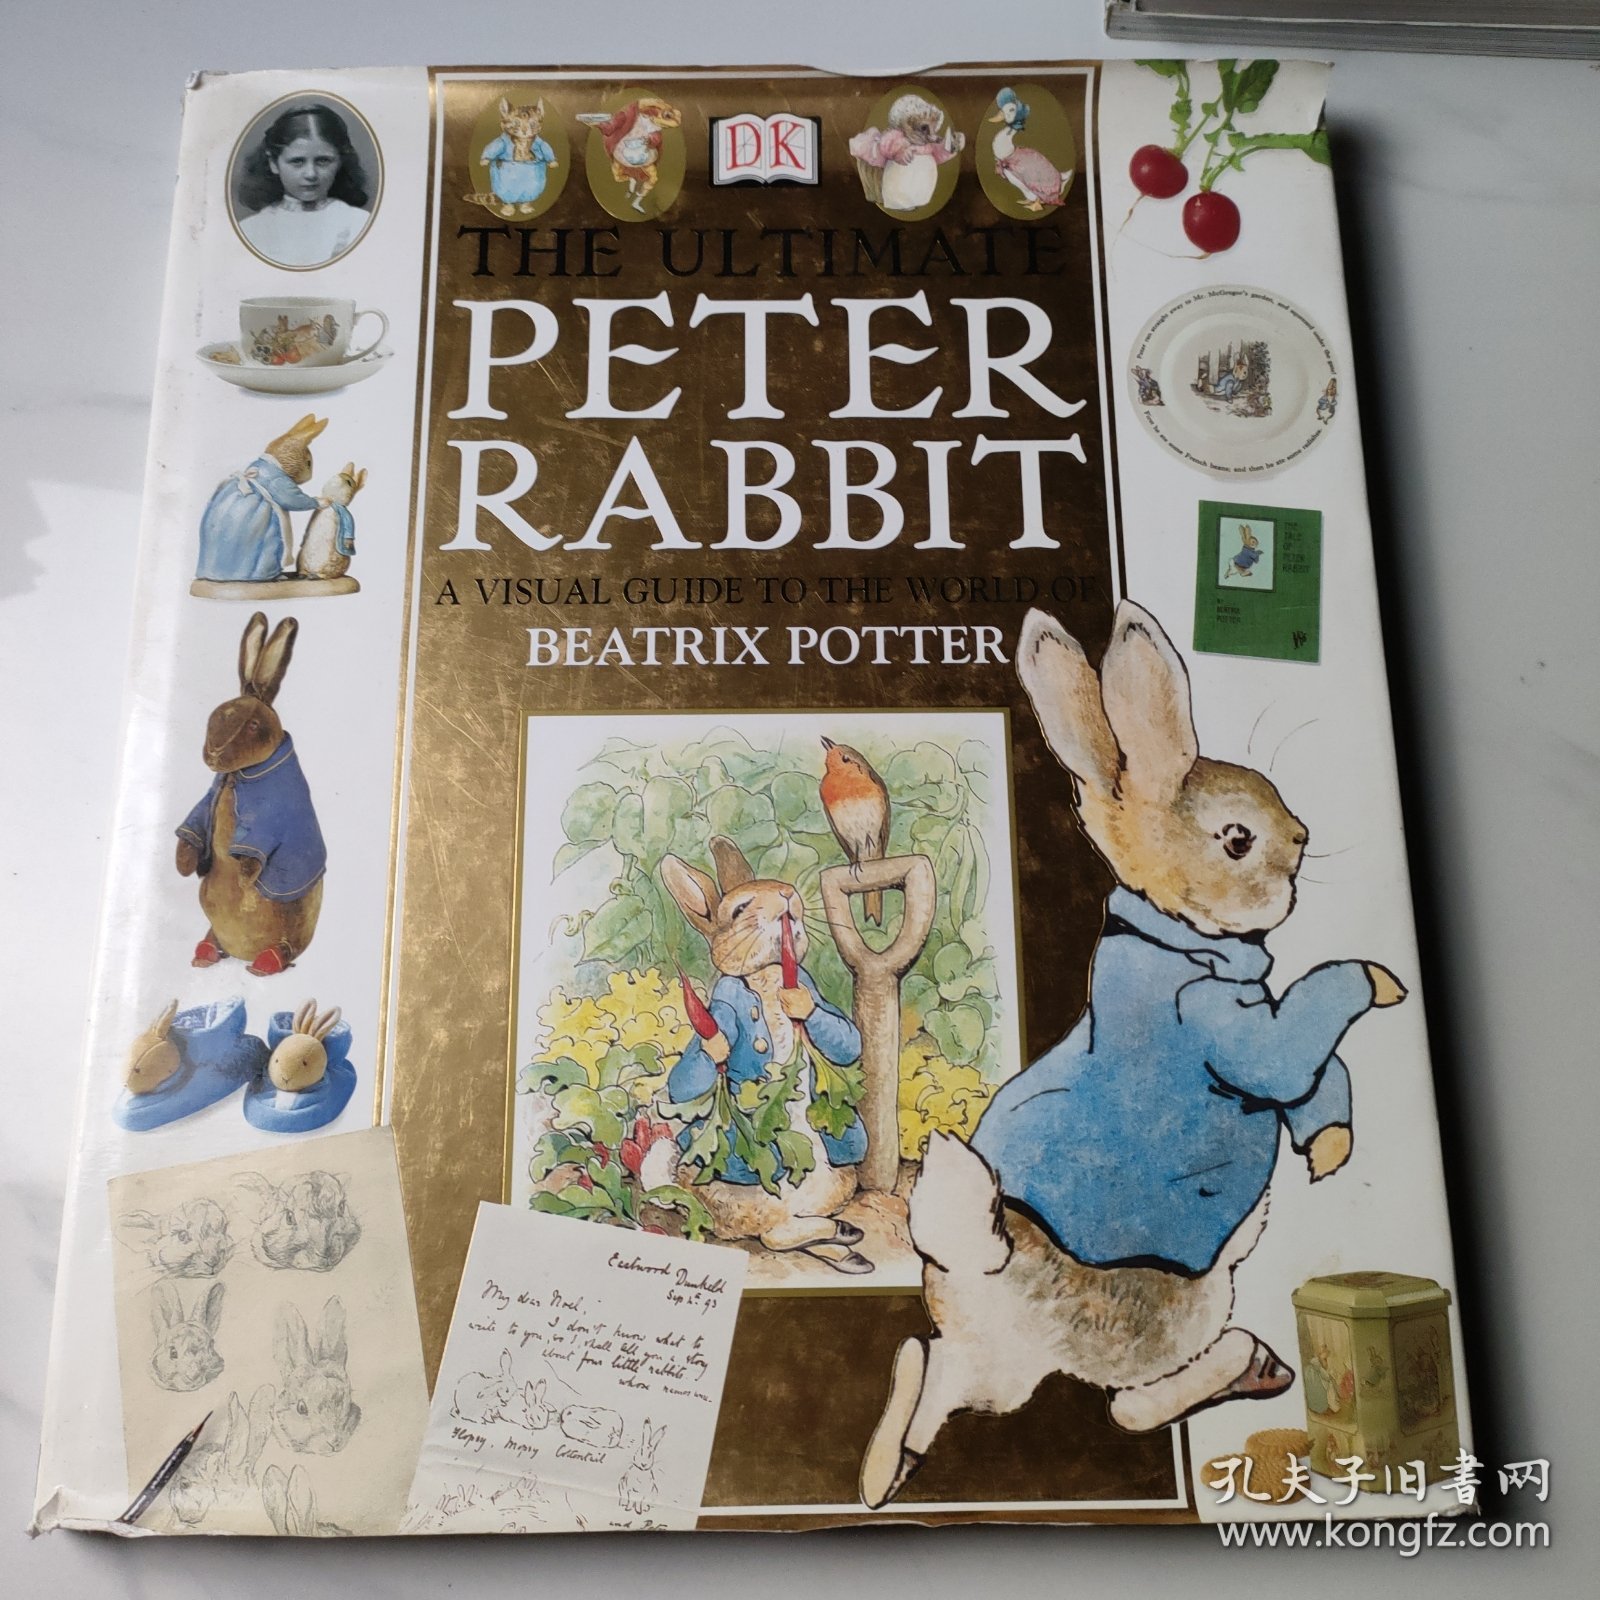 THE ULTIMATE PETER RABBIT